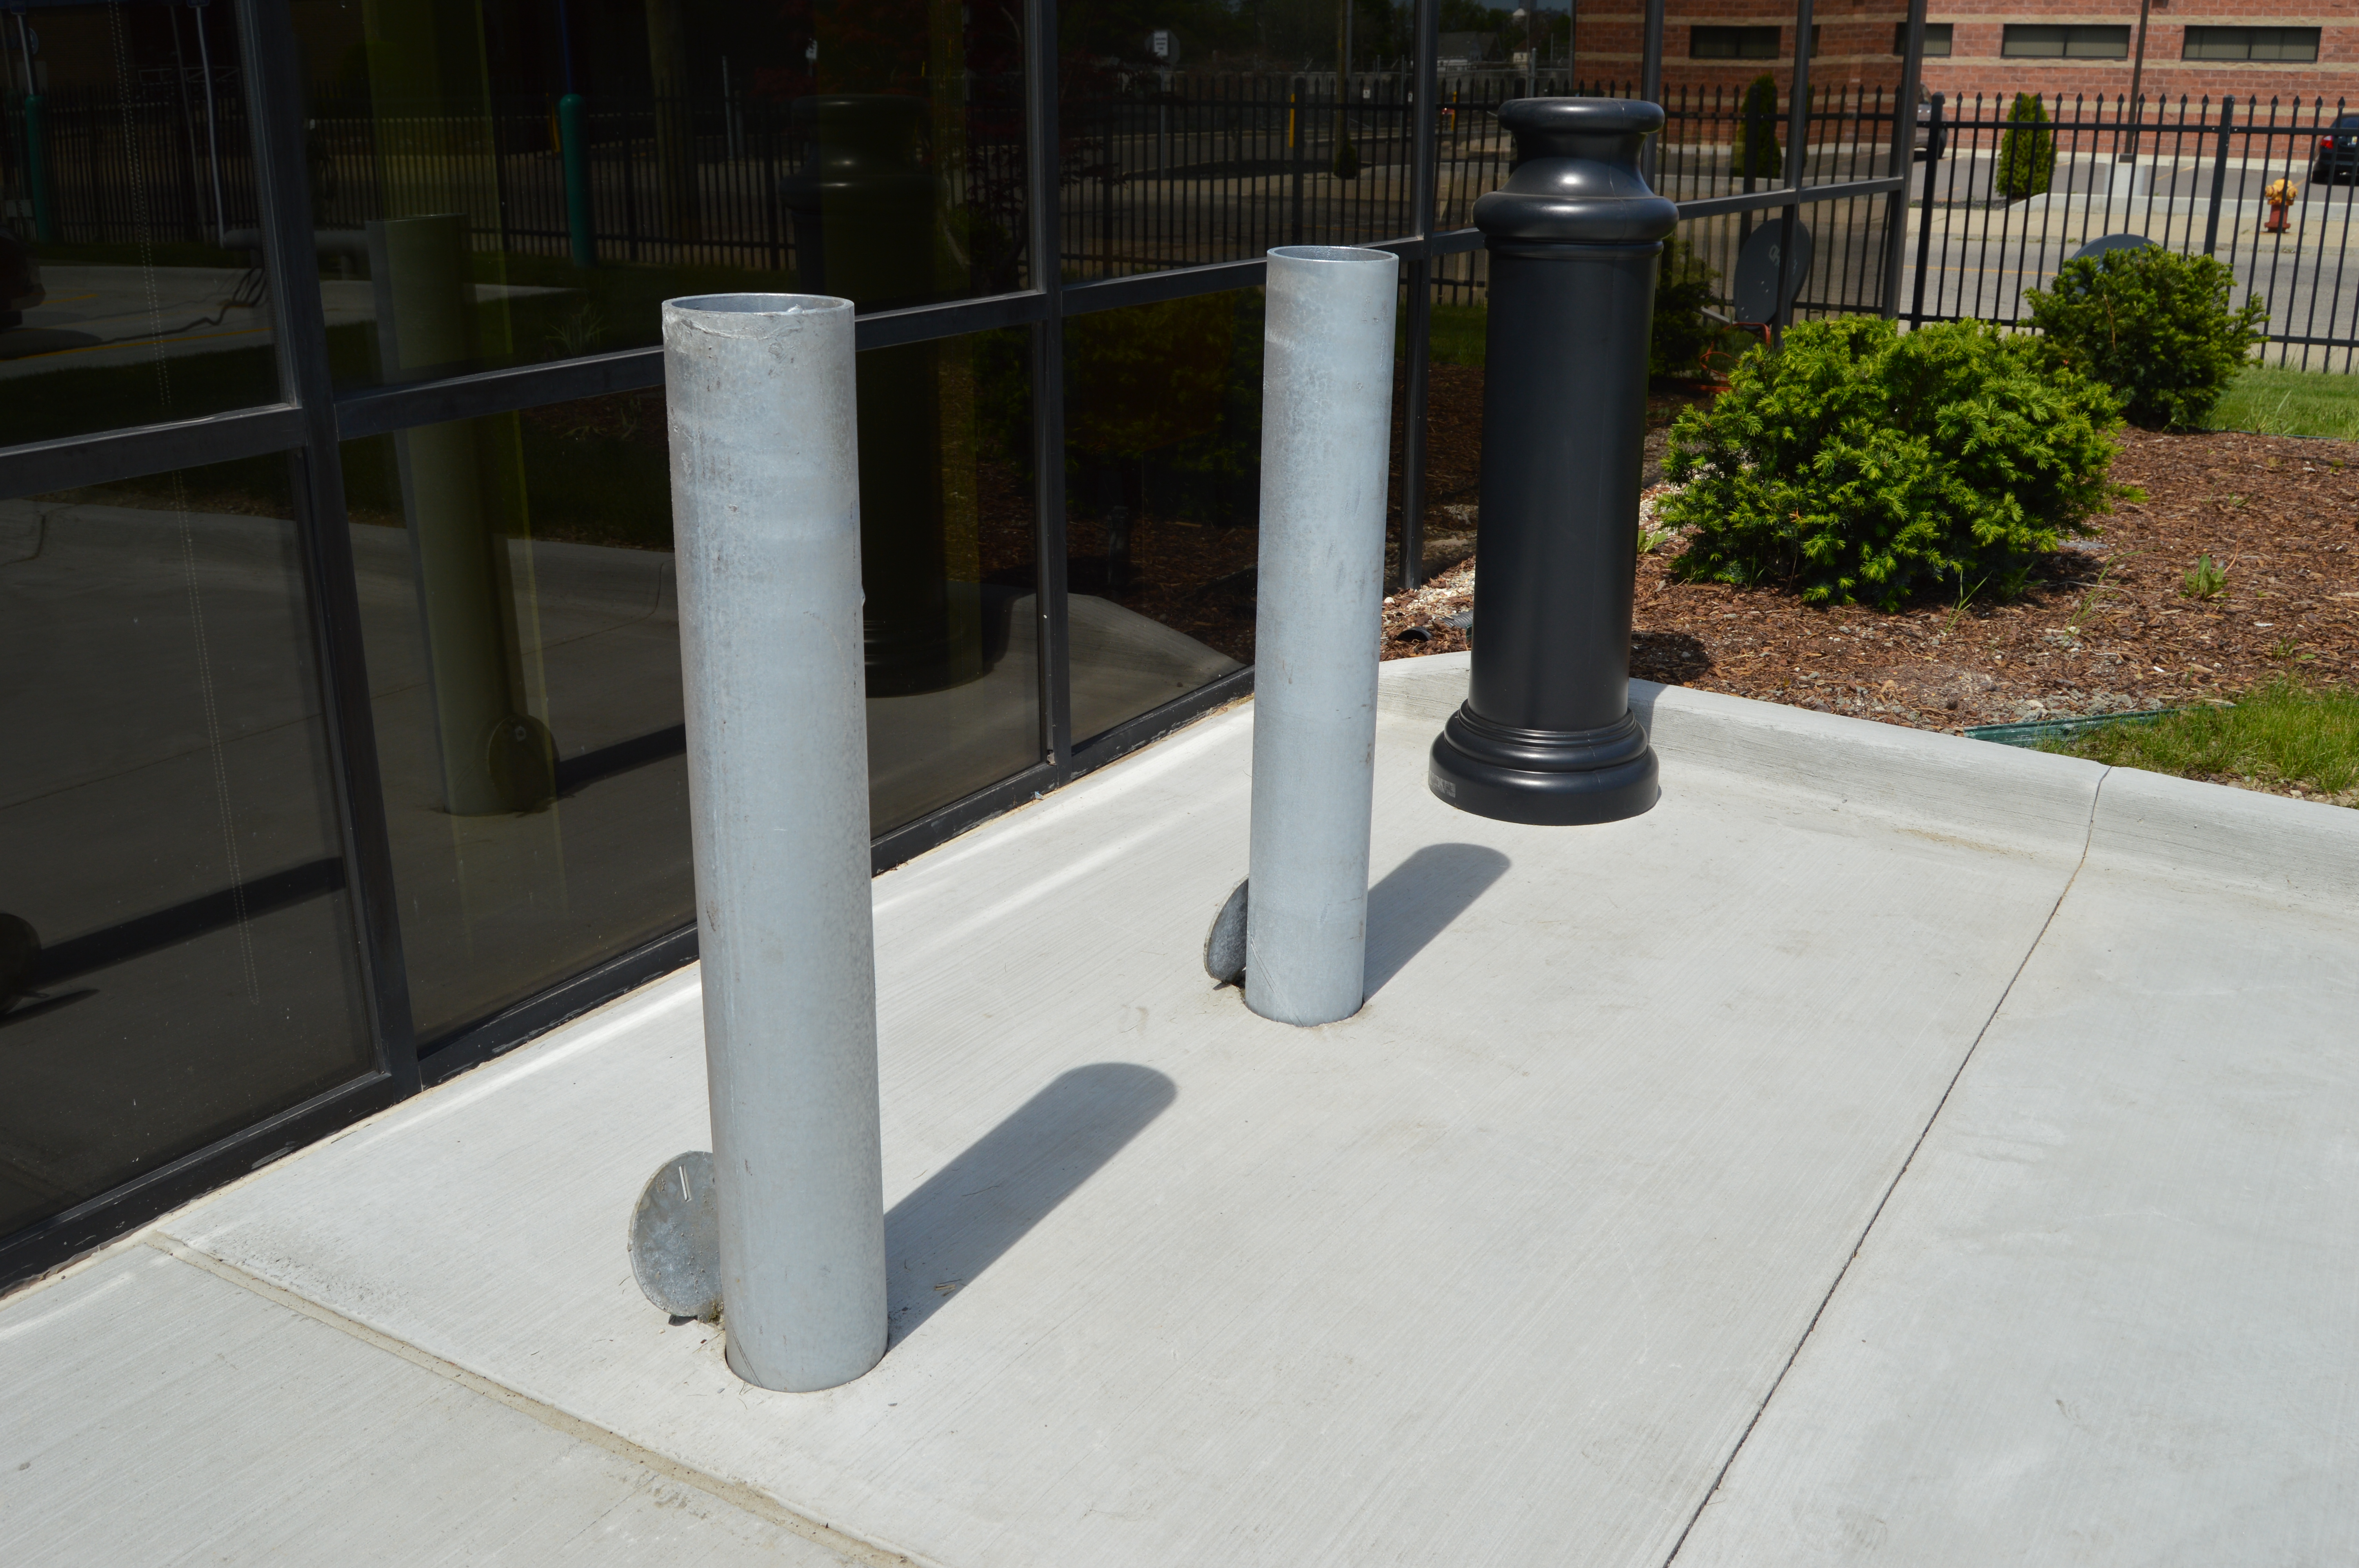 Removable Locking Bollards are perfect for temporary access areas